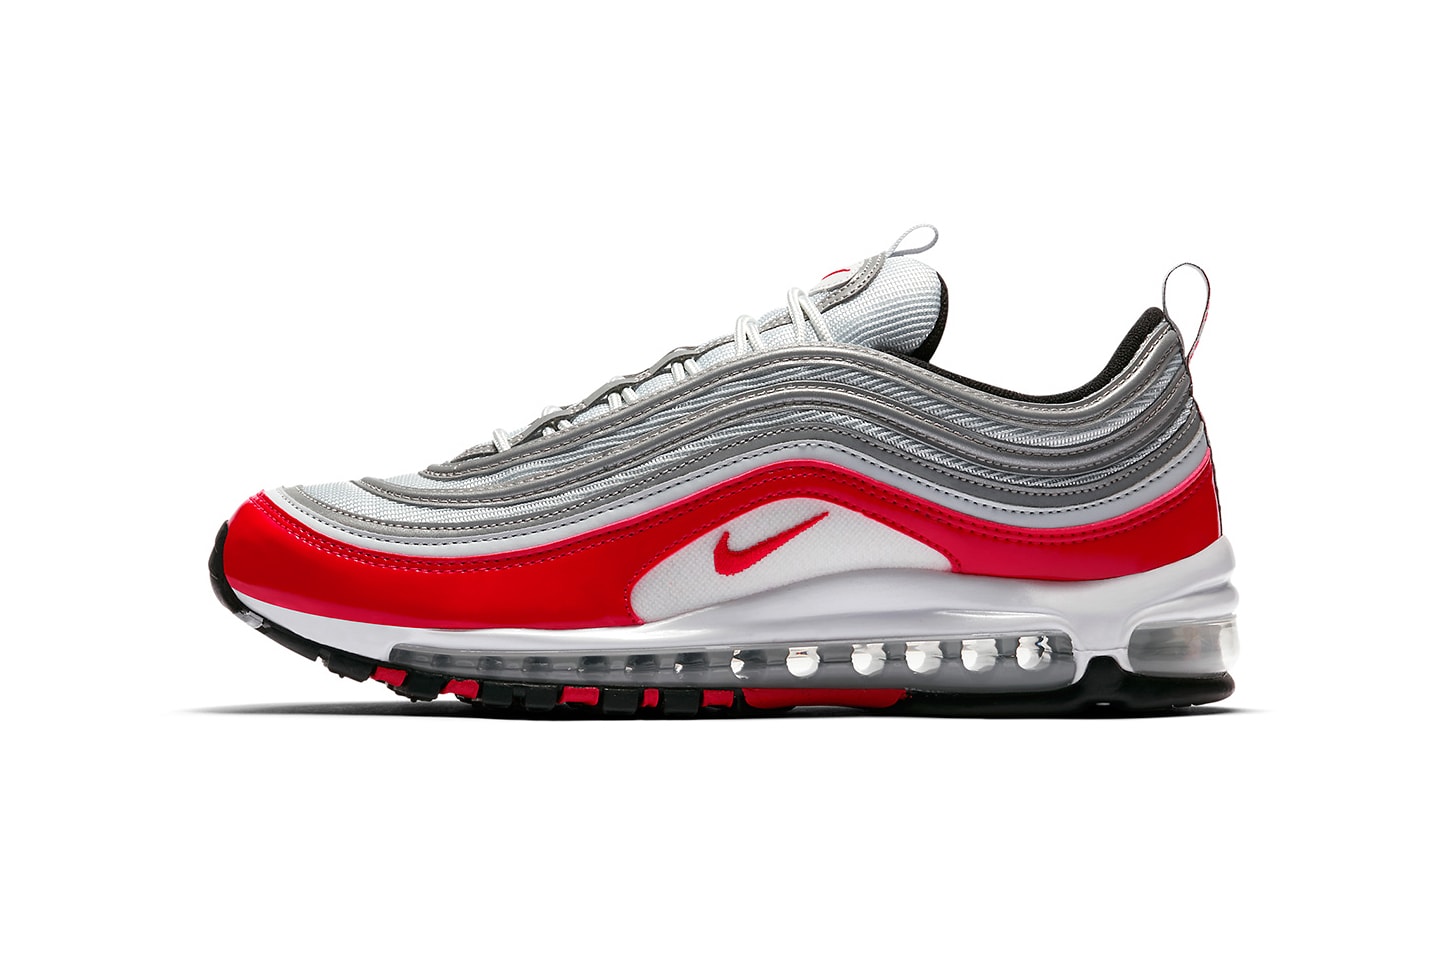 Nike Air Max 97 OG Air Max 1 AM1 Colorway red grey white 921826 009 march spring summer 2018 release date info drop sneakers shoes footwear